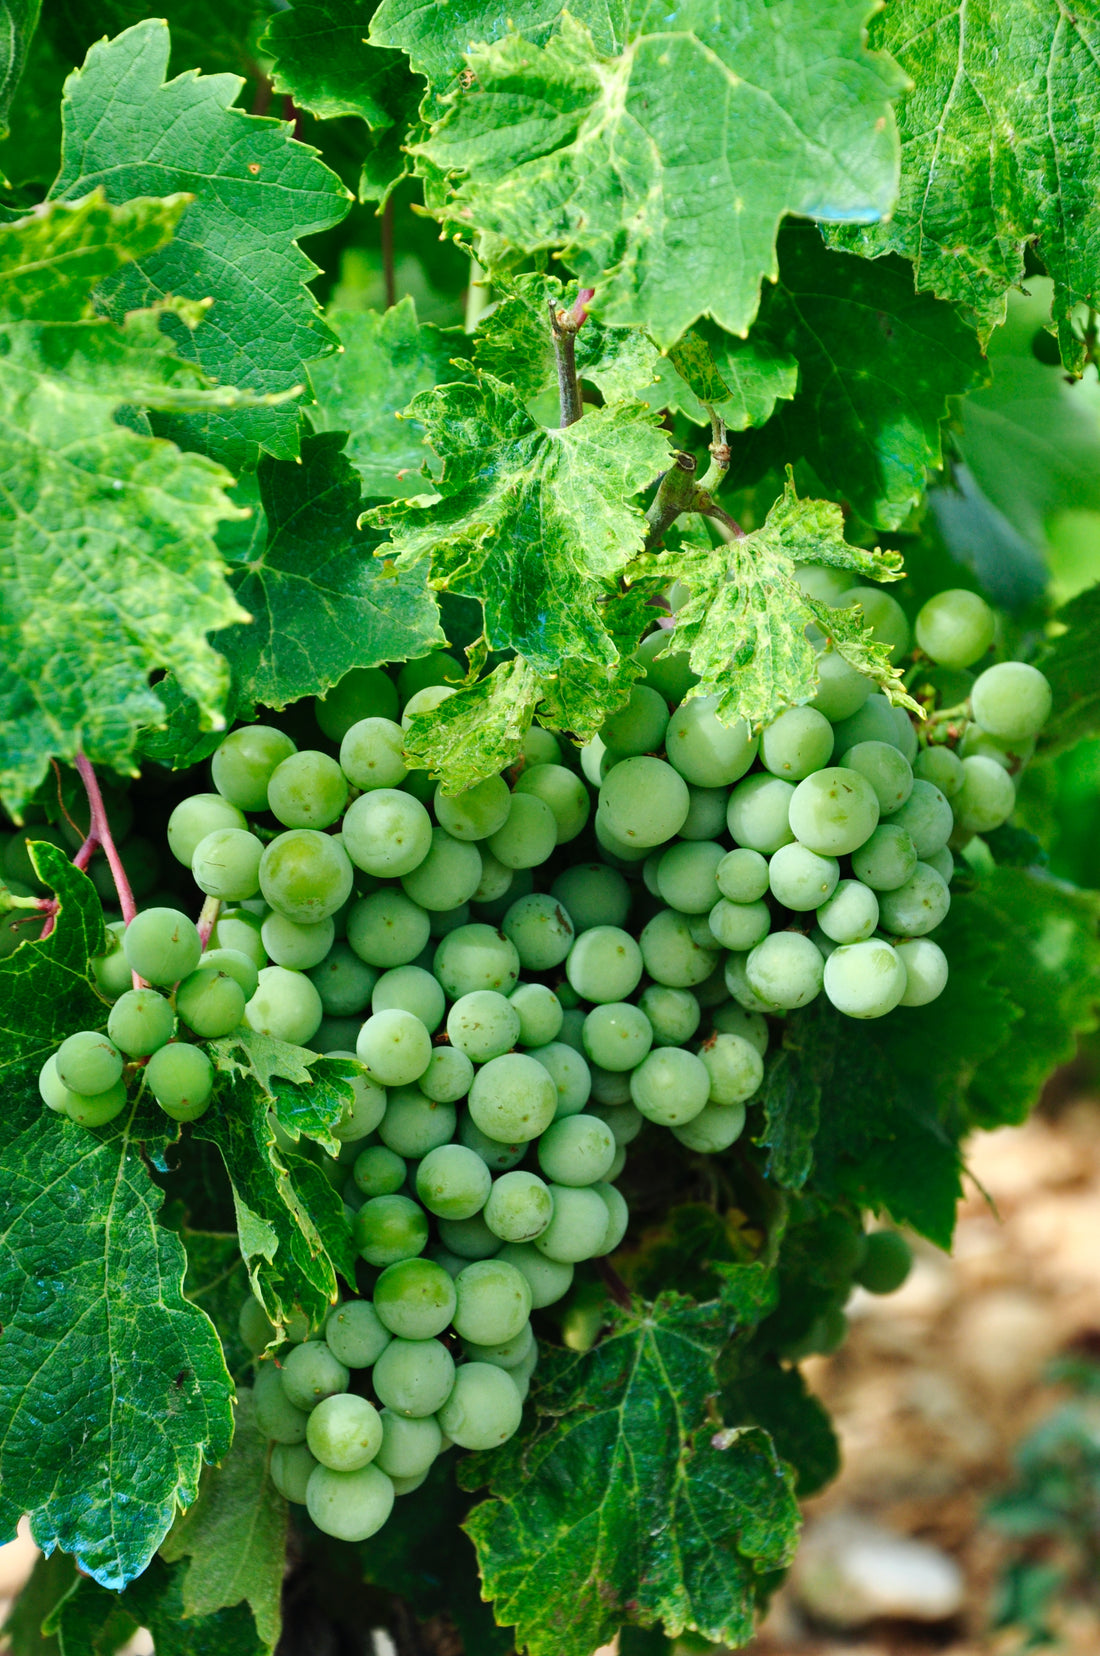 Grape vine with green fruit.